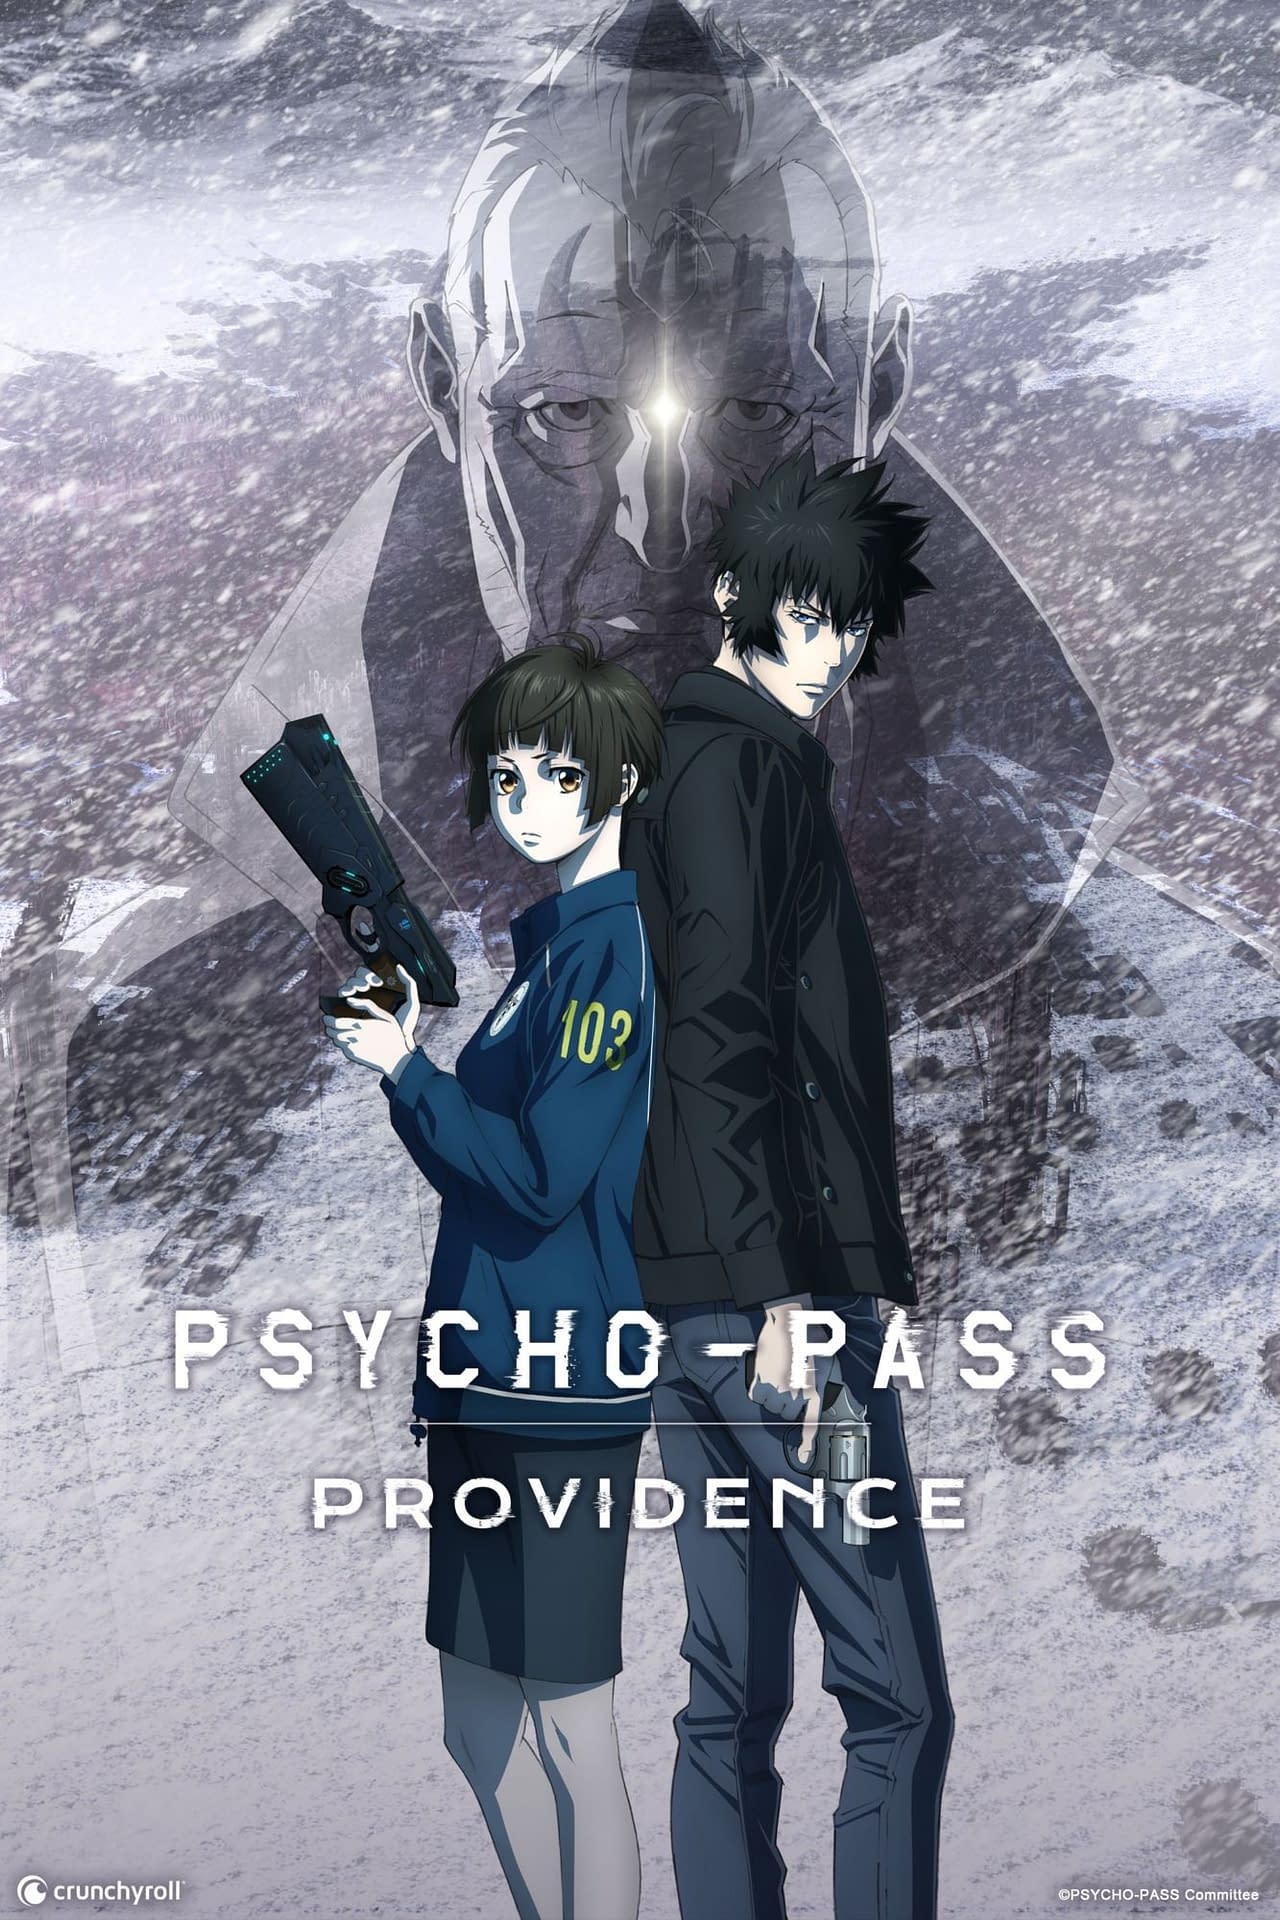 PSYCHO-PASS: Providence Gets Preview Clip Courtesy of Crunchyroll